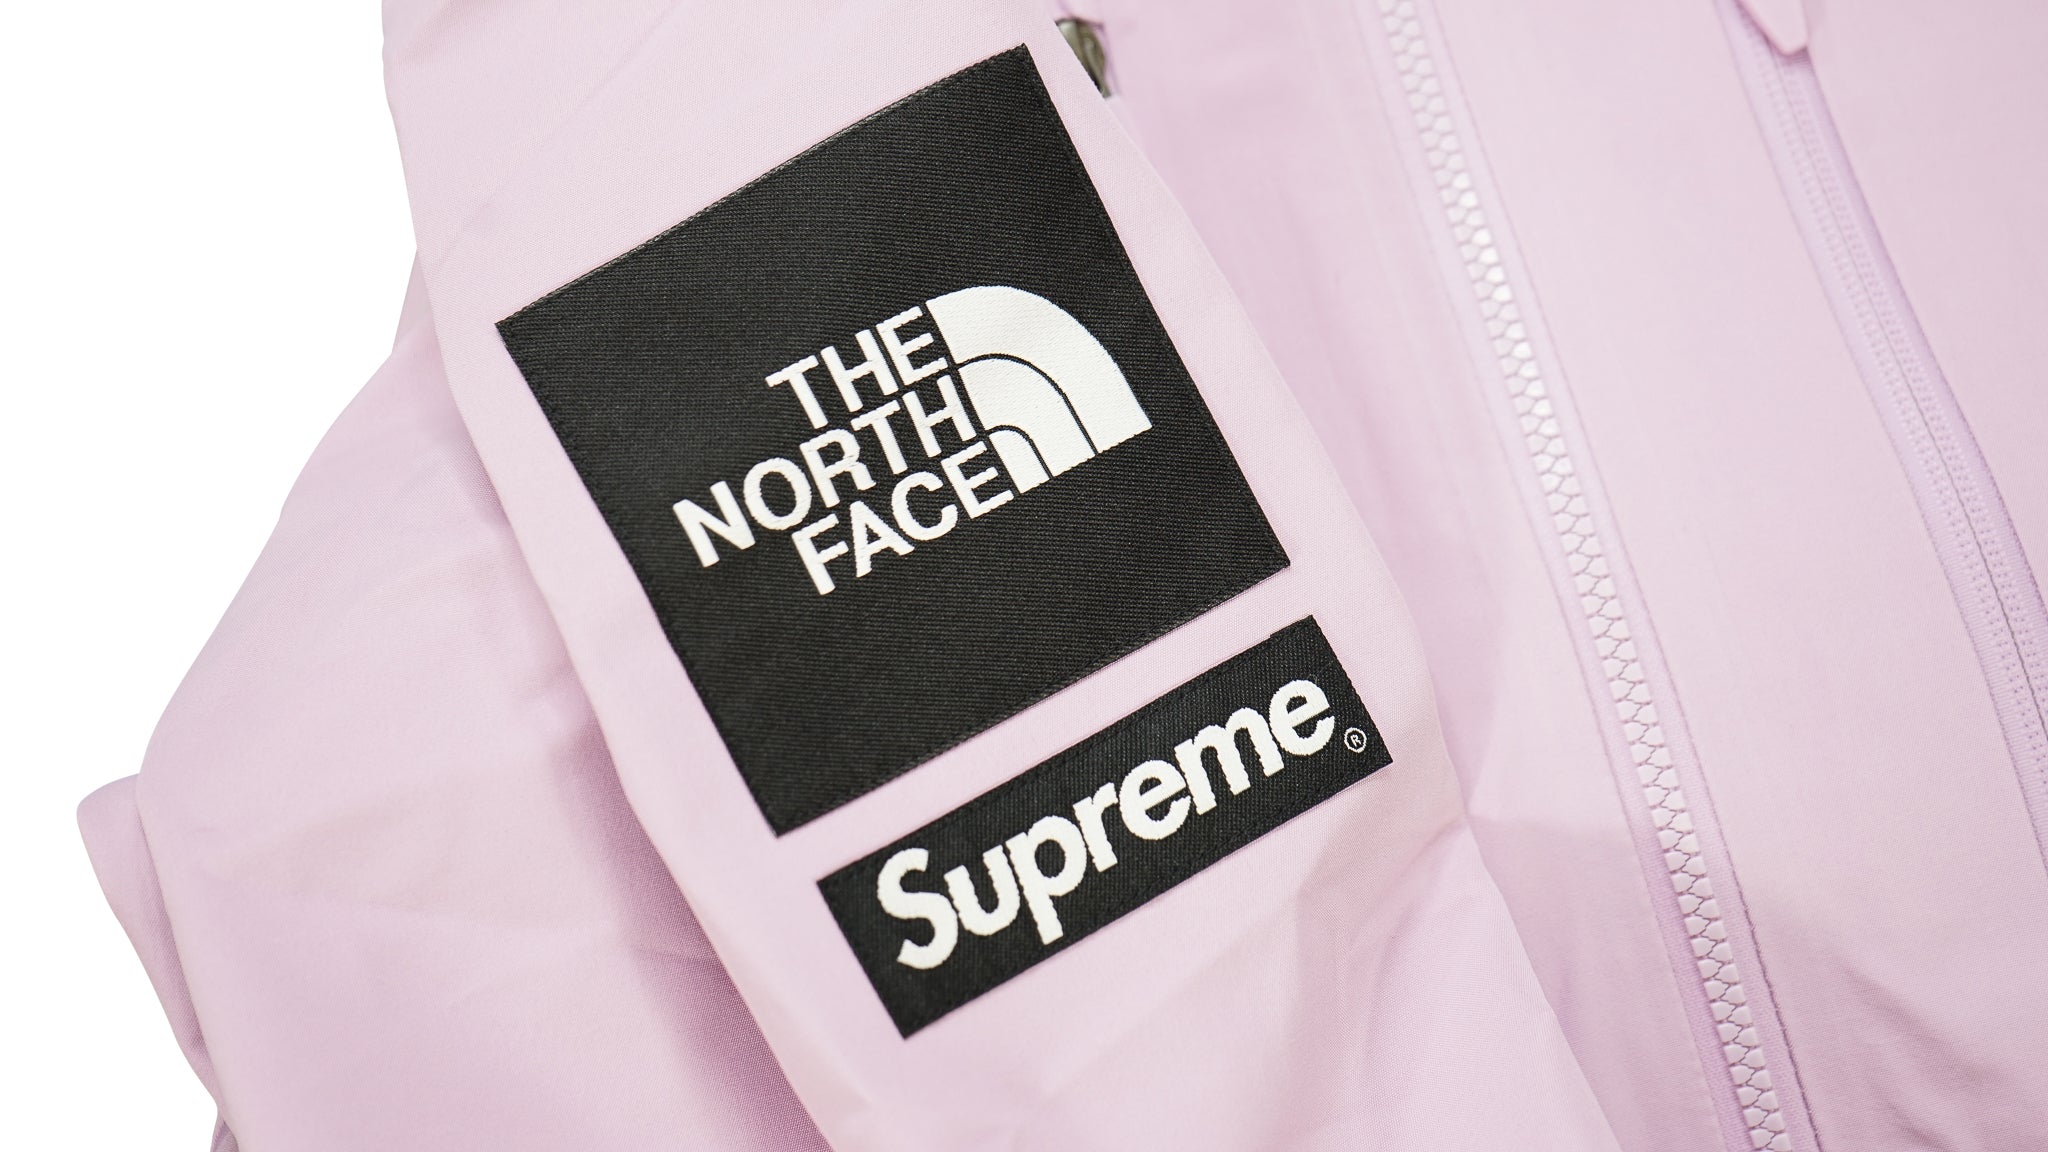 Supreme® x The North Face® Summit Series Rescue Mountain Pro Jacket Black  Size M